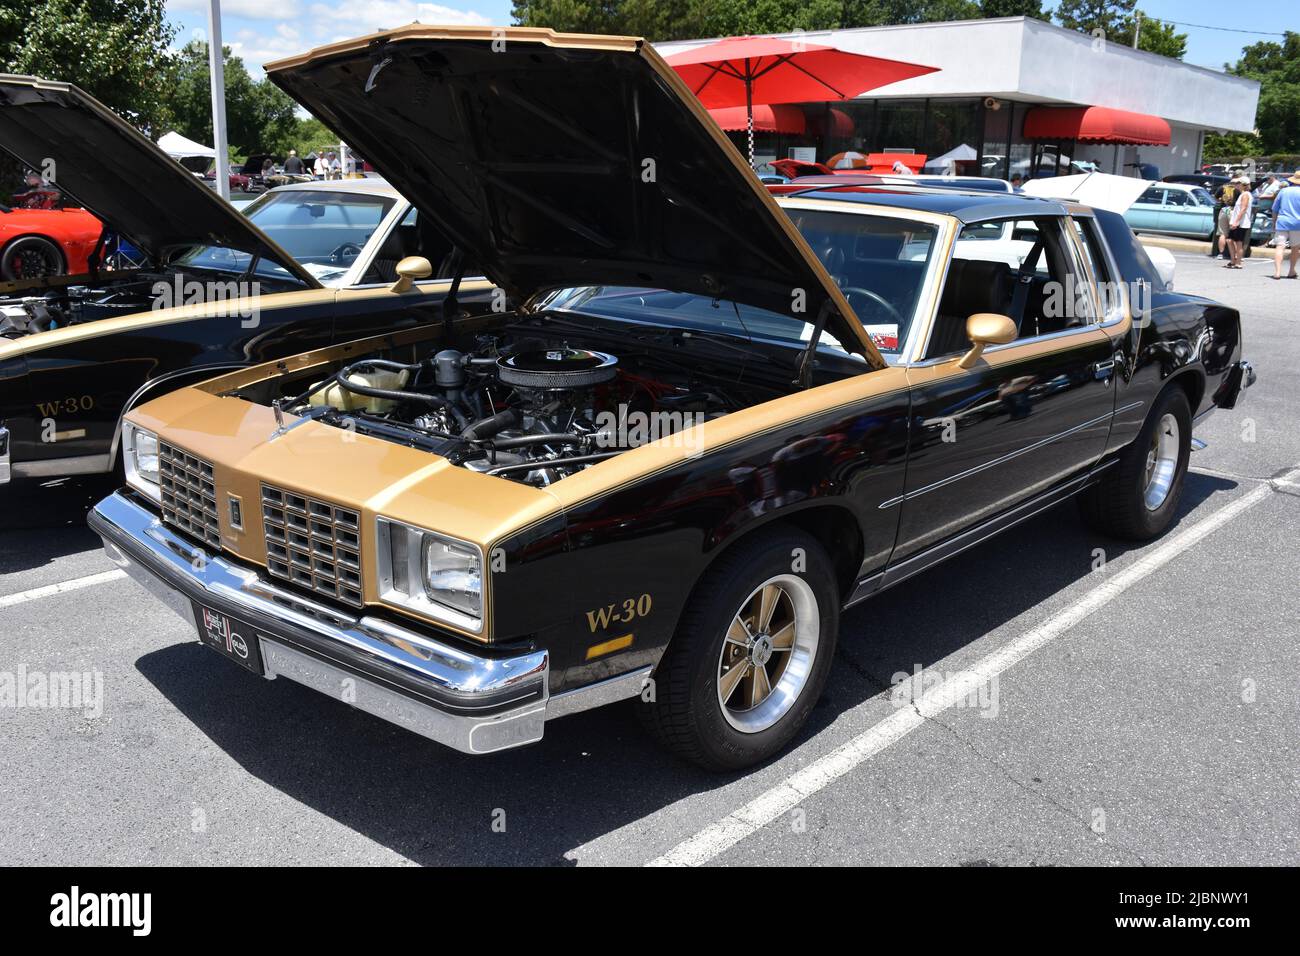 A 1979 Oldsmobile Cutlass W-30 on display at a car show. Stock Photo